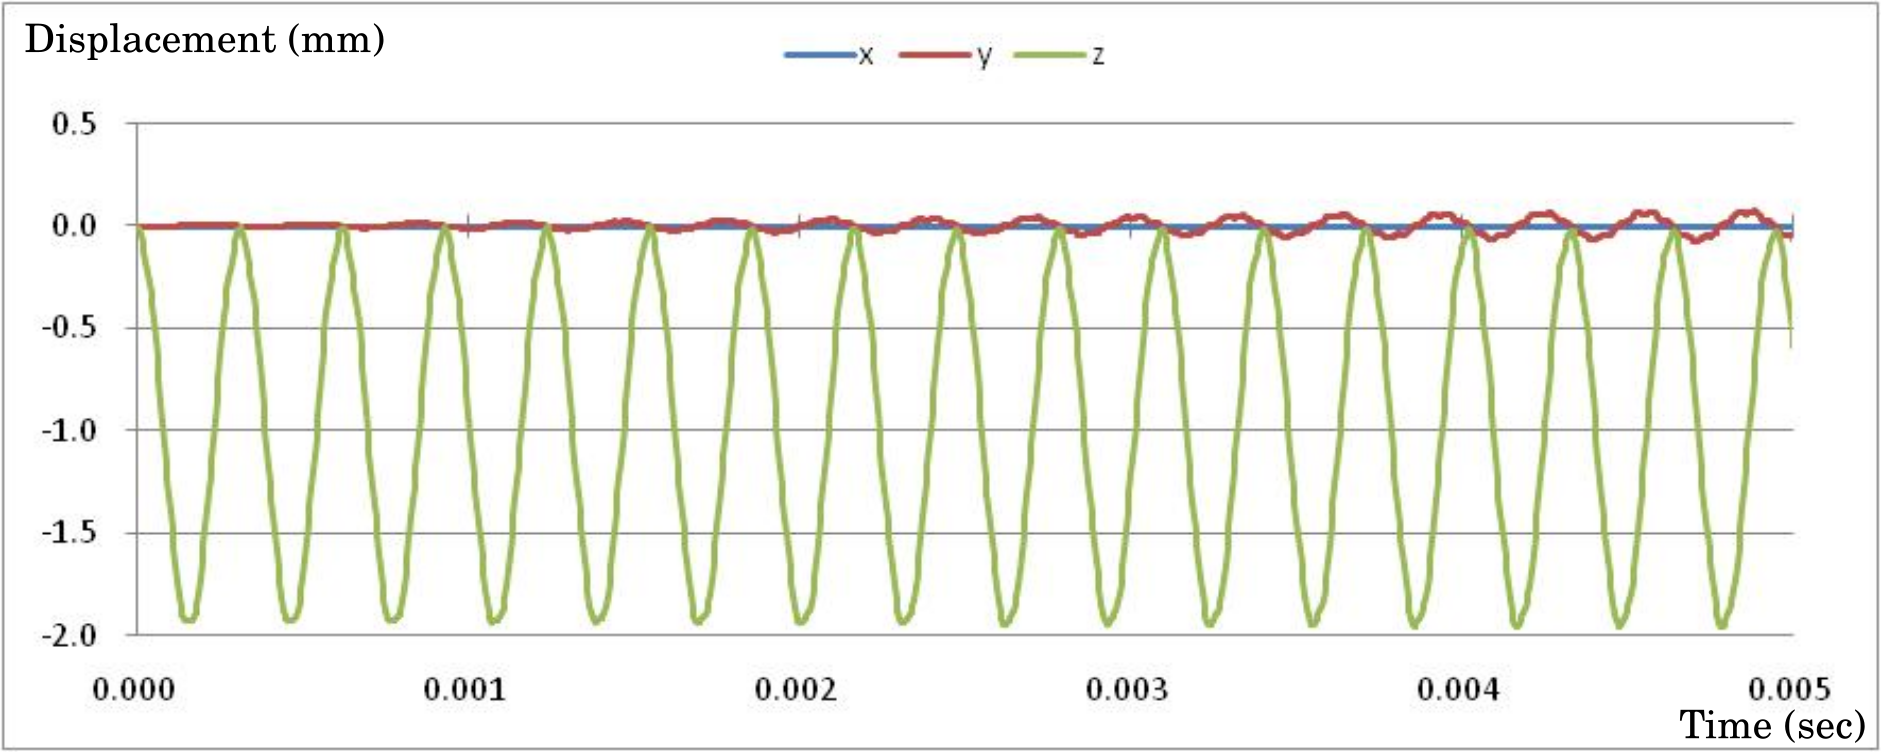 Time-series displacement of monitoring nodes